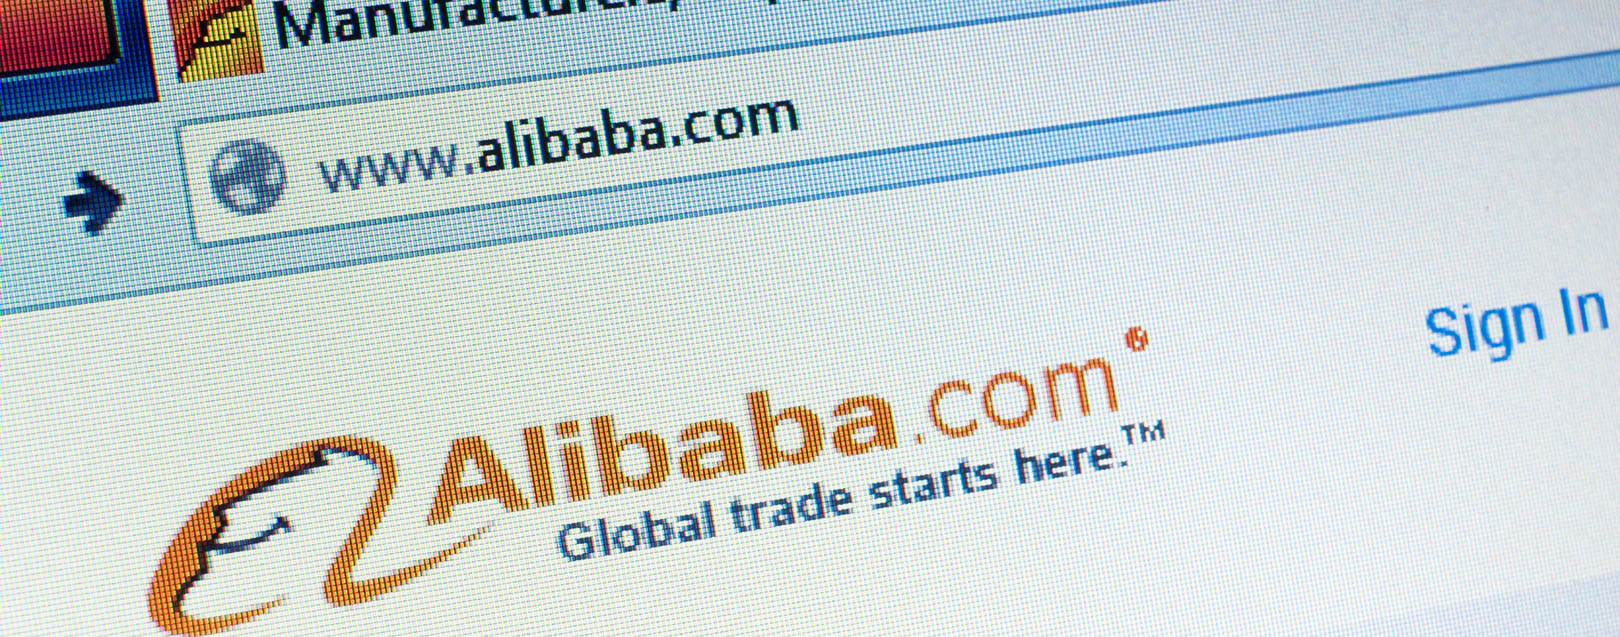 Alibaba’s Global MD meets Sitharaman to discuss investment